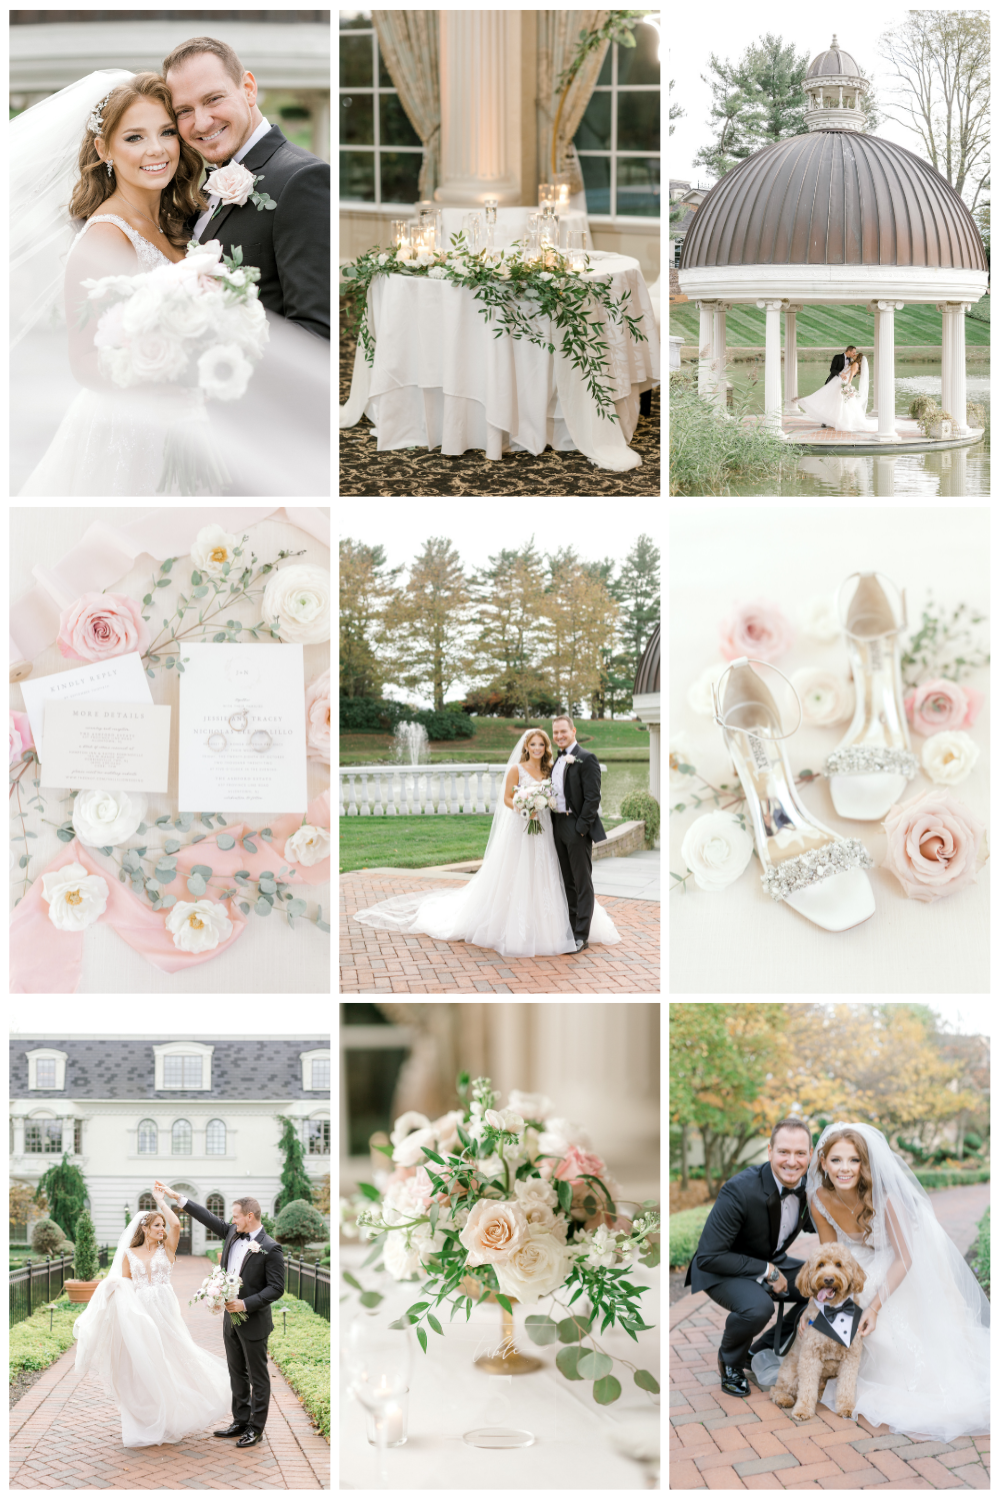 Classic wedding with pastel pink and white details at the Ashford Estate in Allentown, NJ photographed by Susan Elizabeth Photography